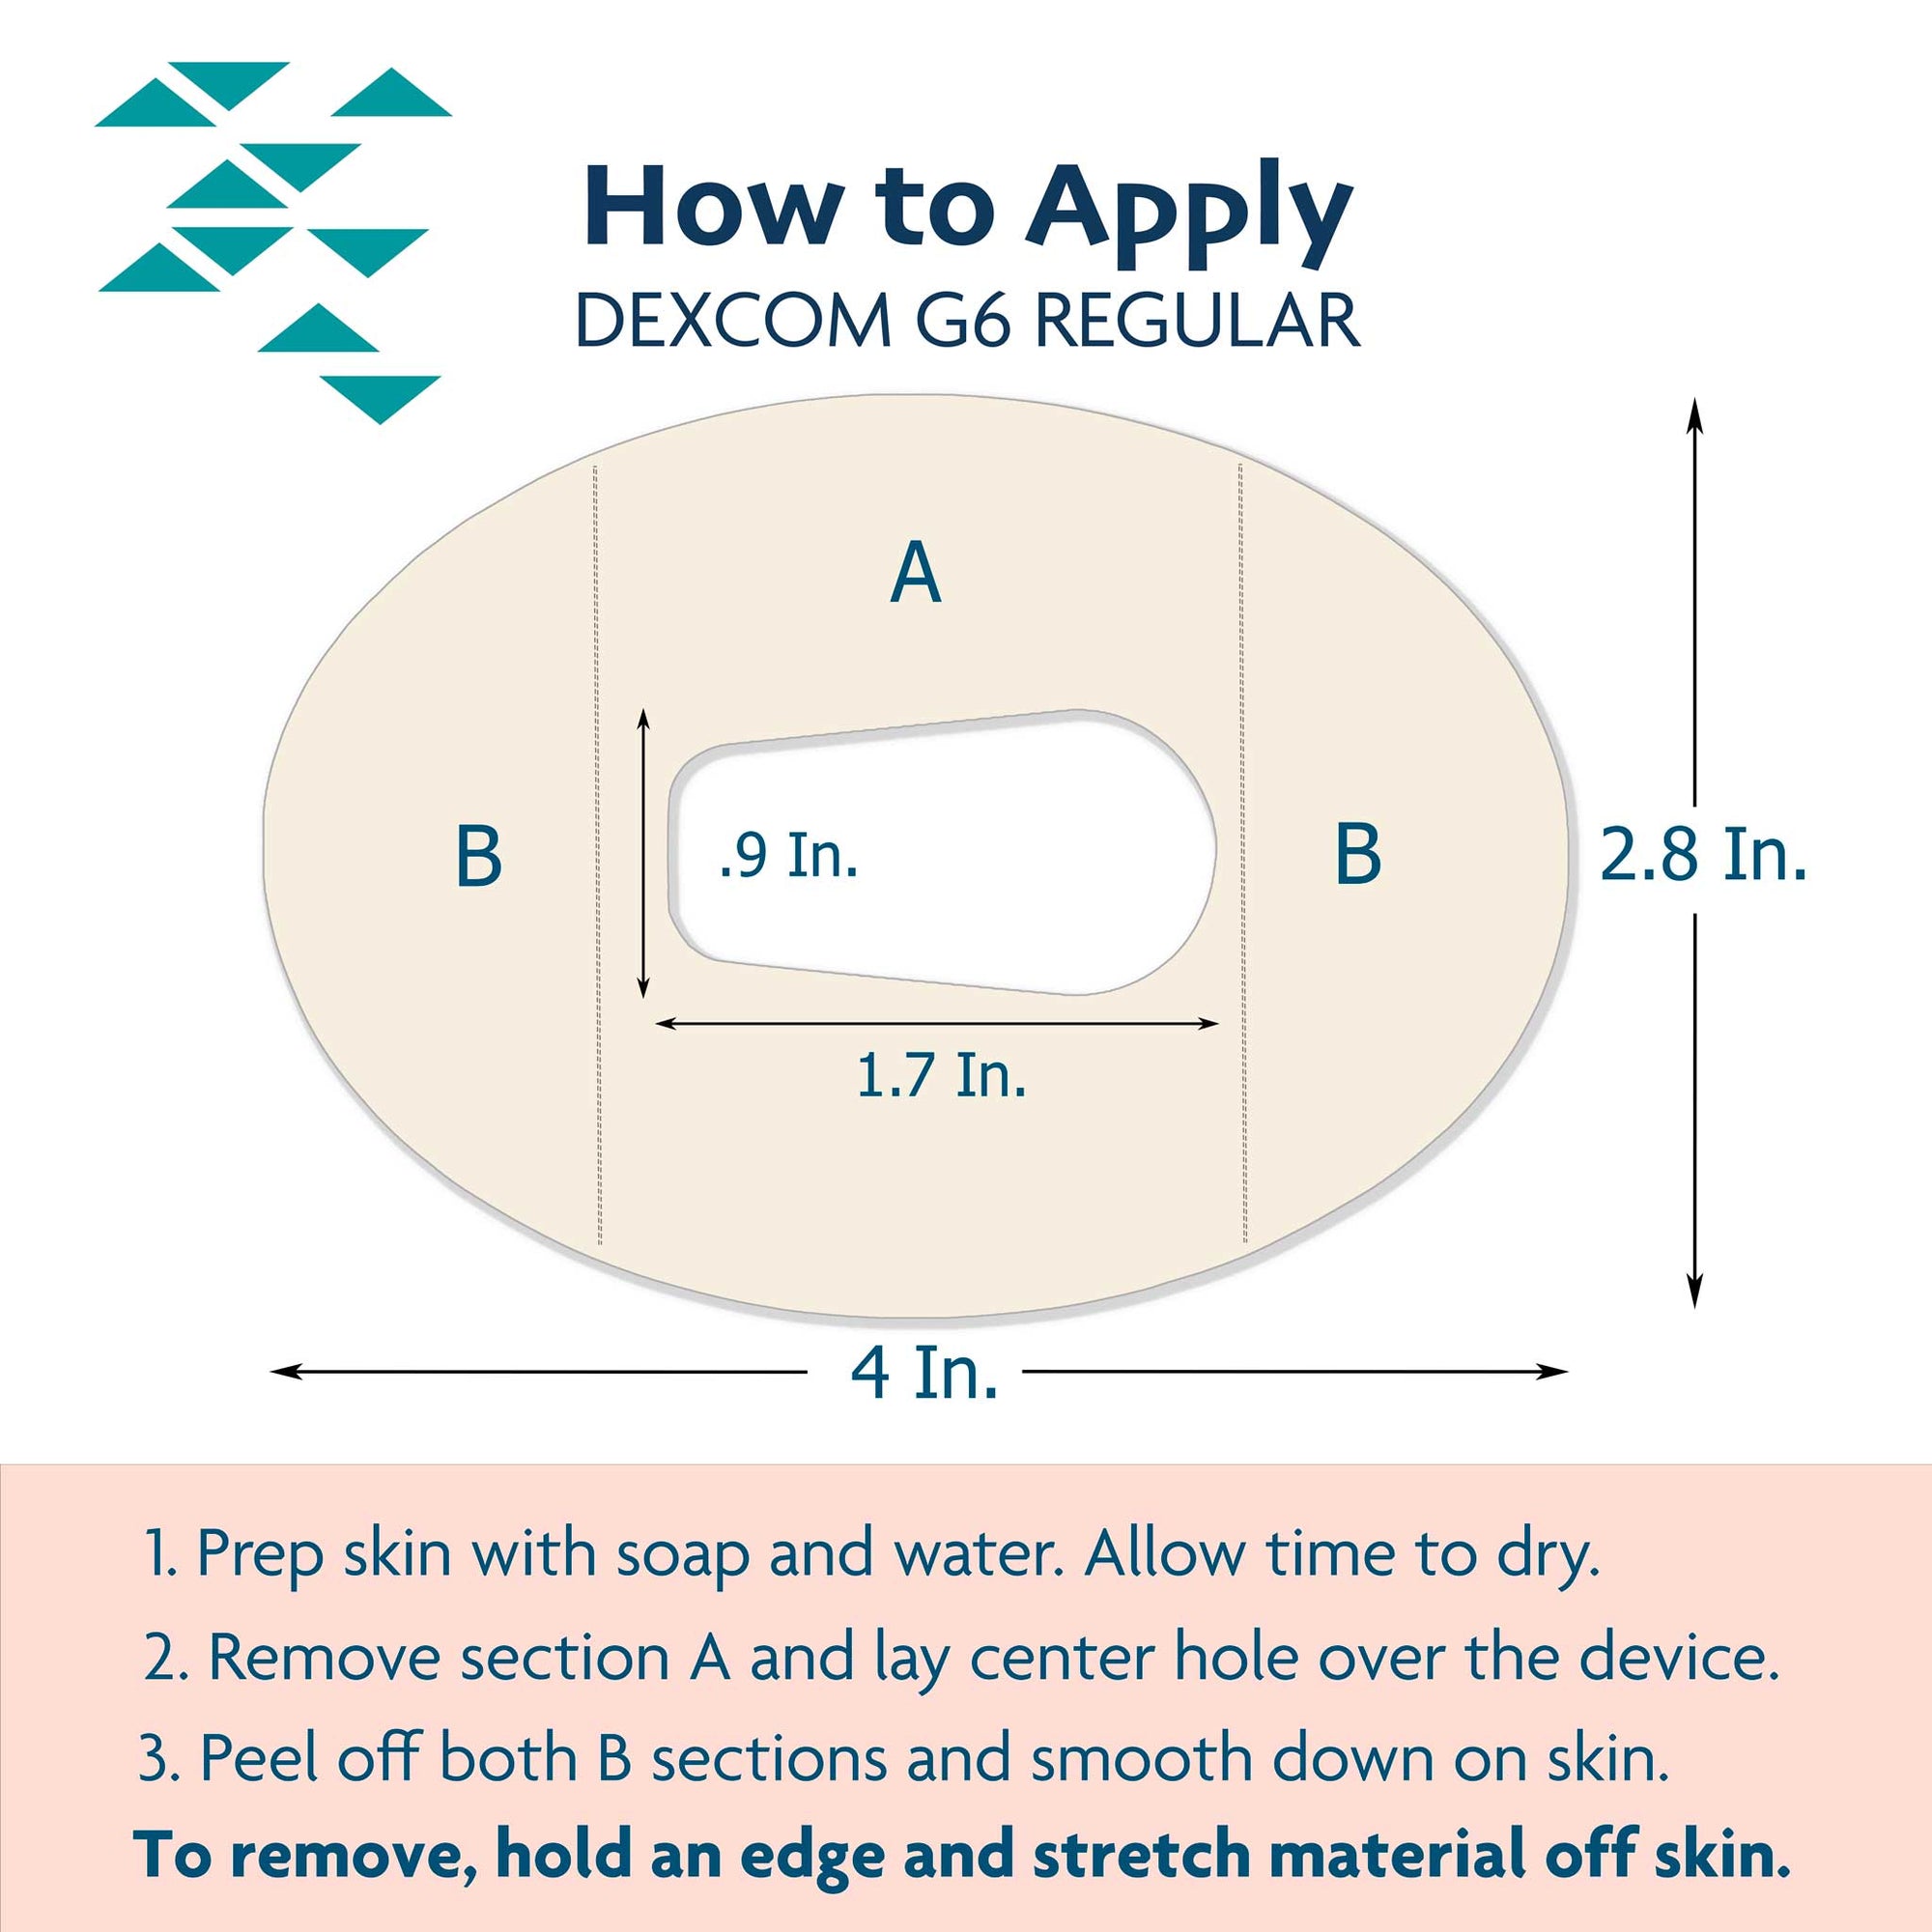 Tutorial to properly apply CGM cover to Dexcom G6 device